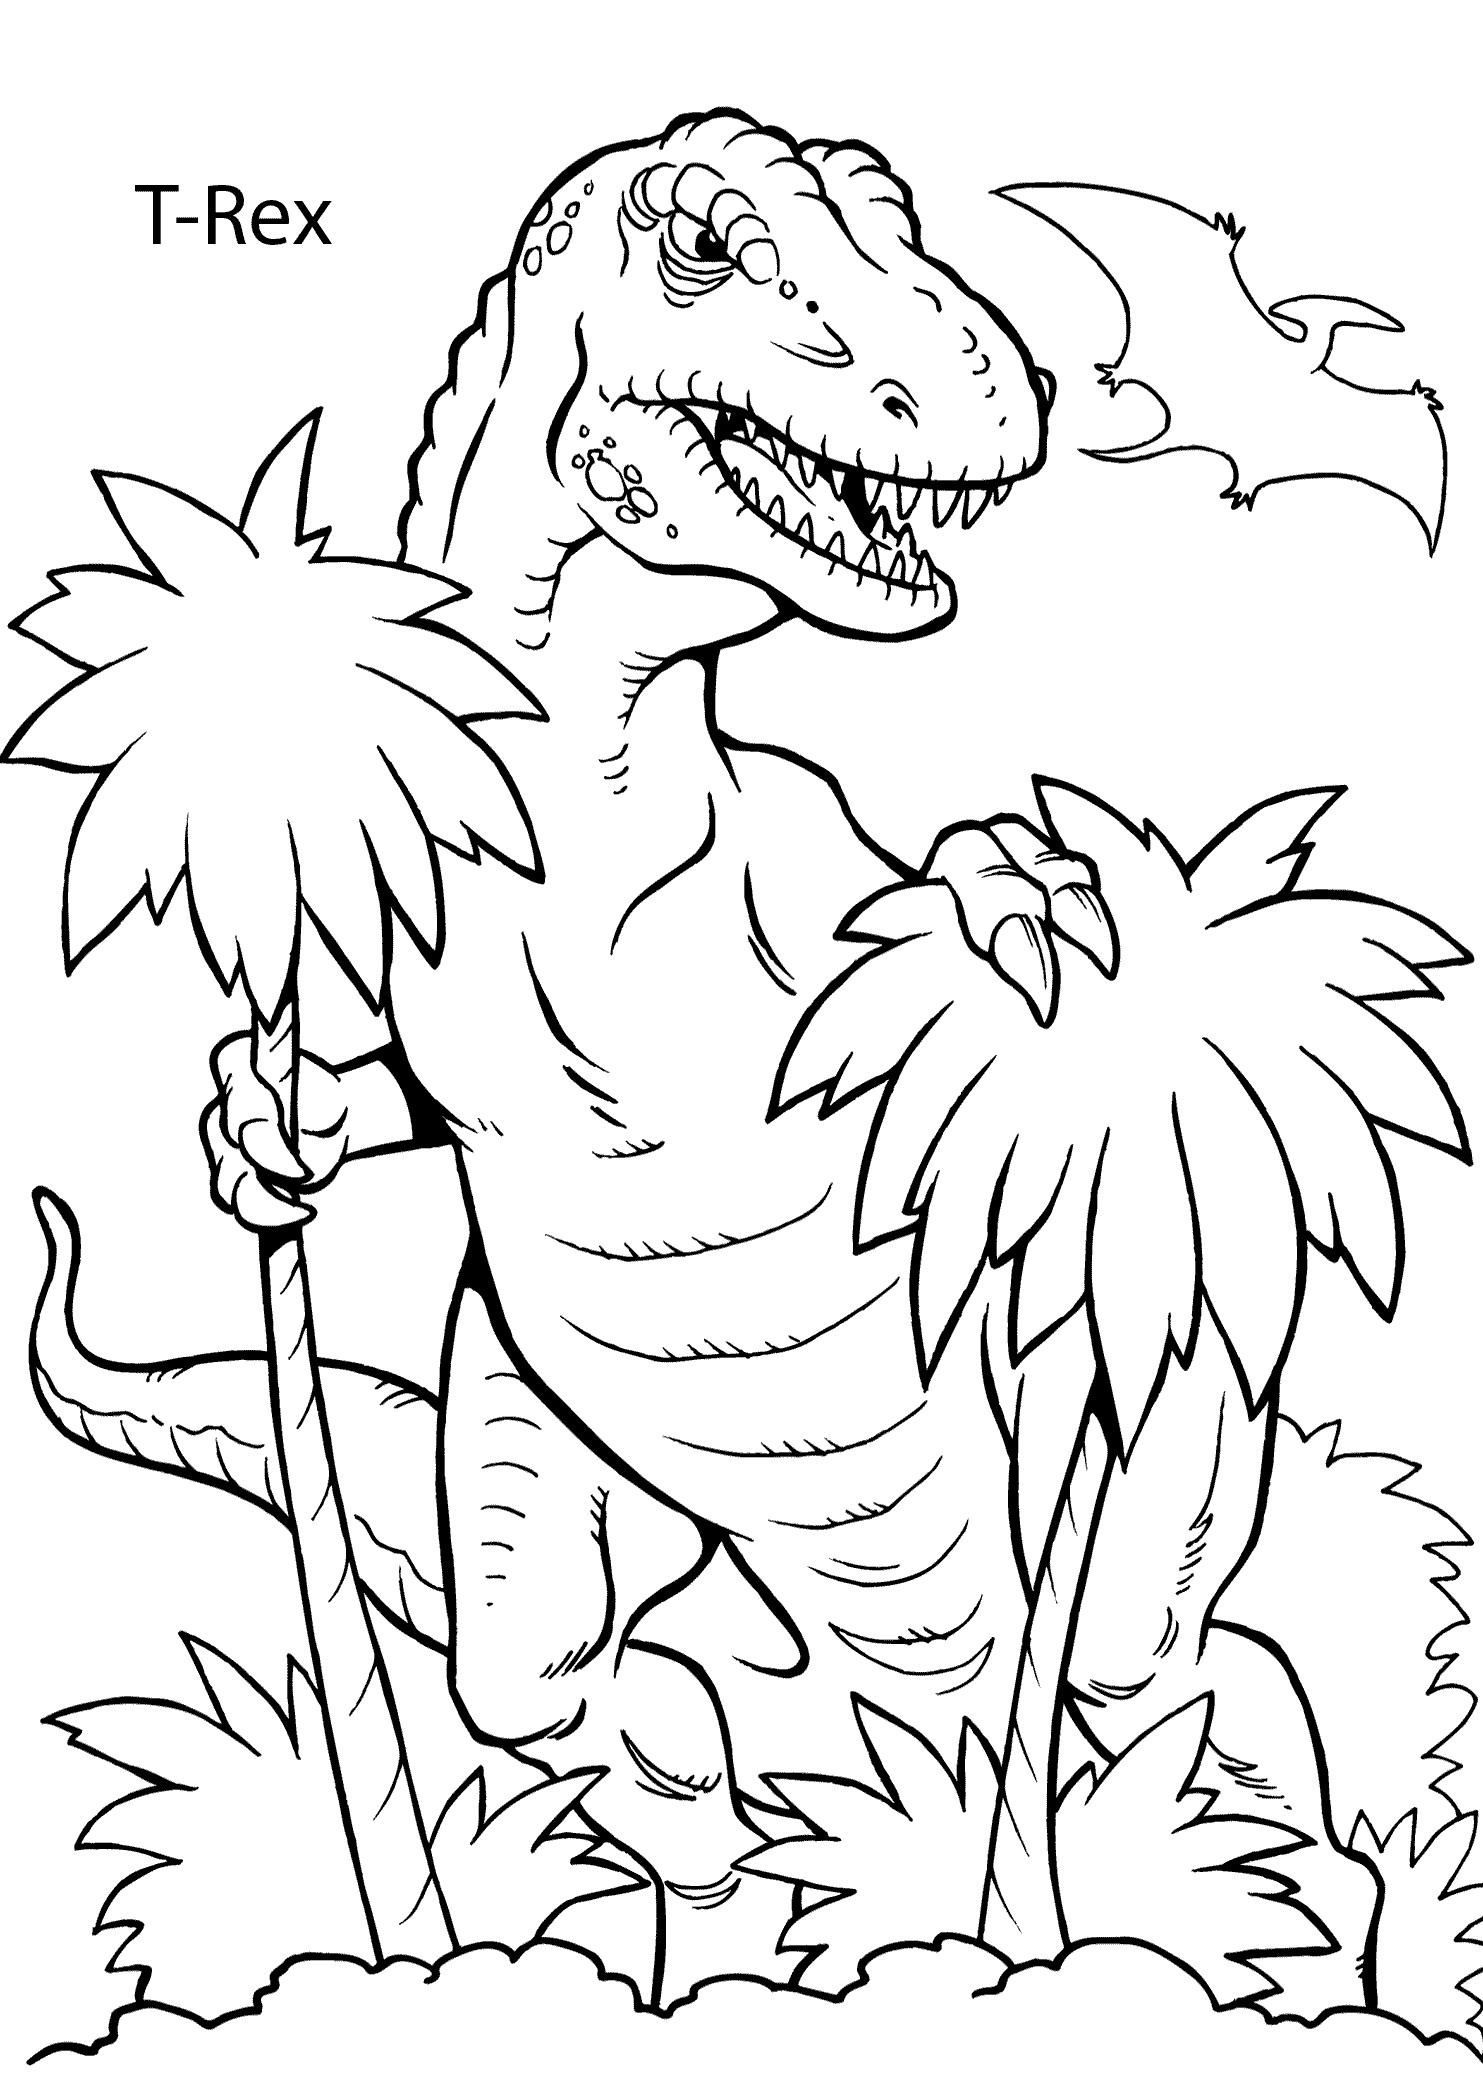 Jurassic Park Dinosaurs Coloring Pages - BubaKids.com